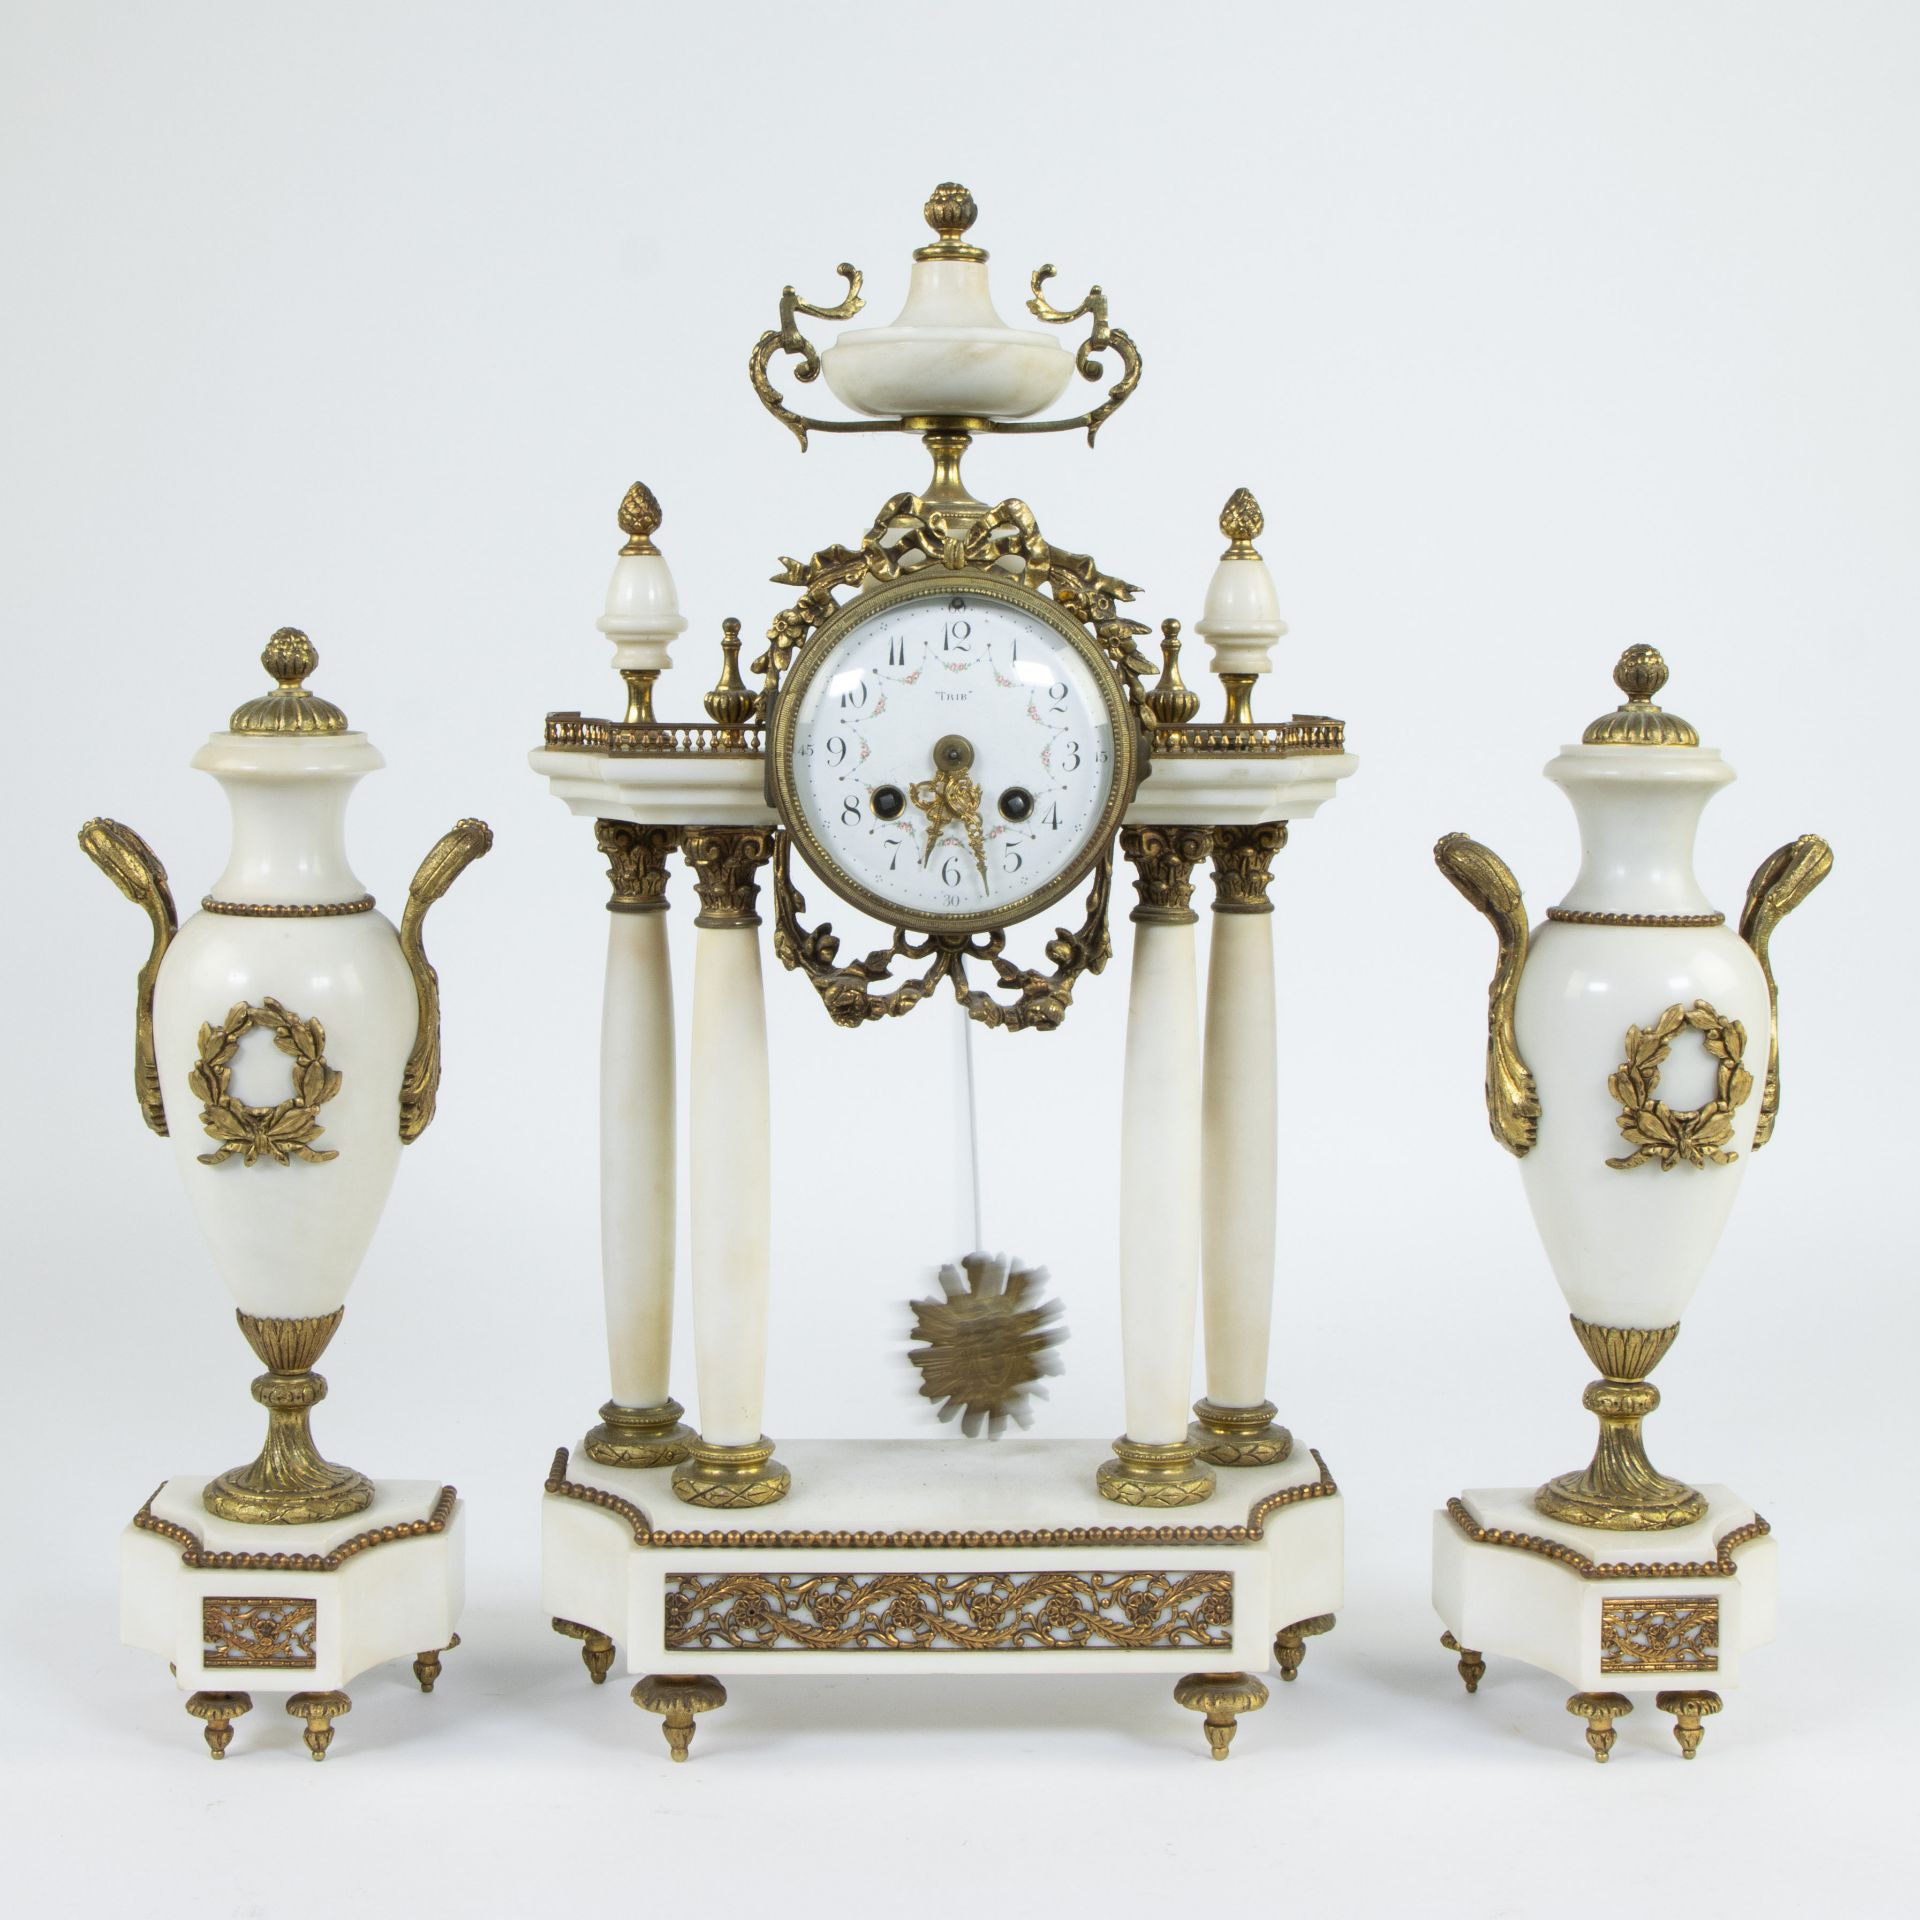 Three-part neoclassical garniture in bronze and white marble, consisting of a pair of cassolettes an